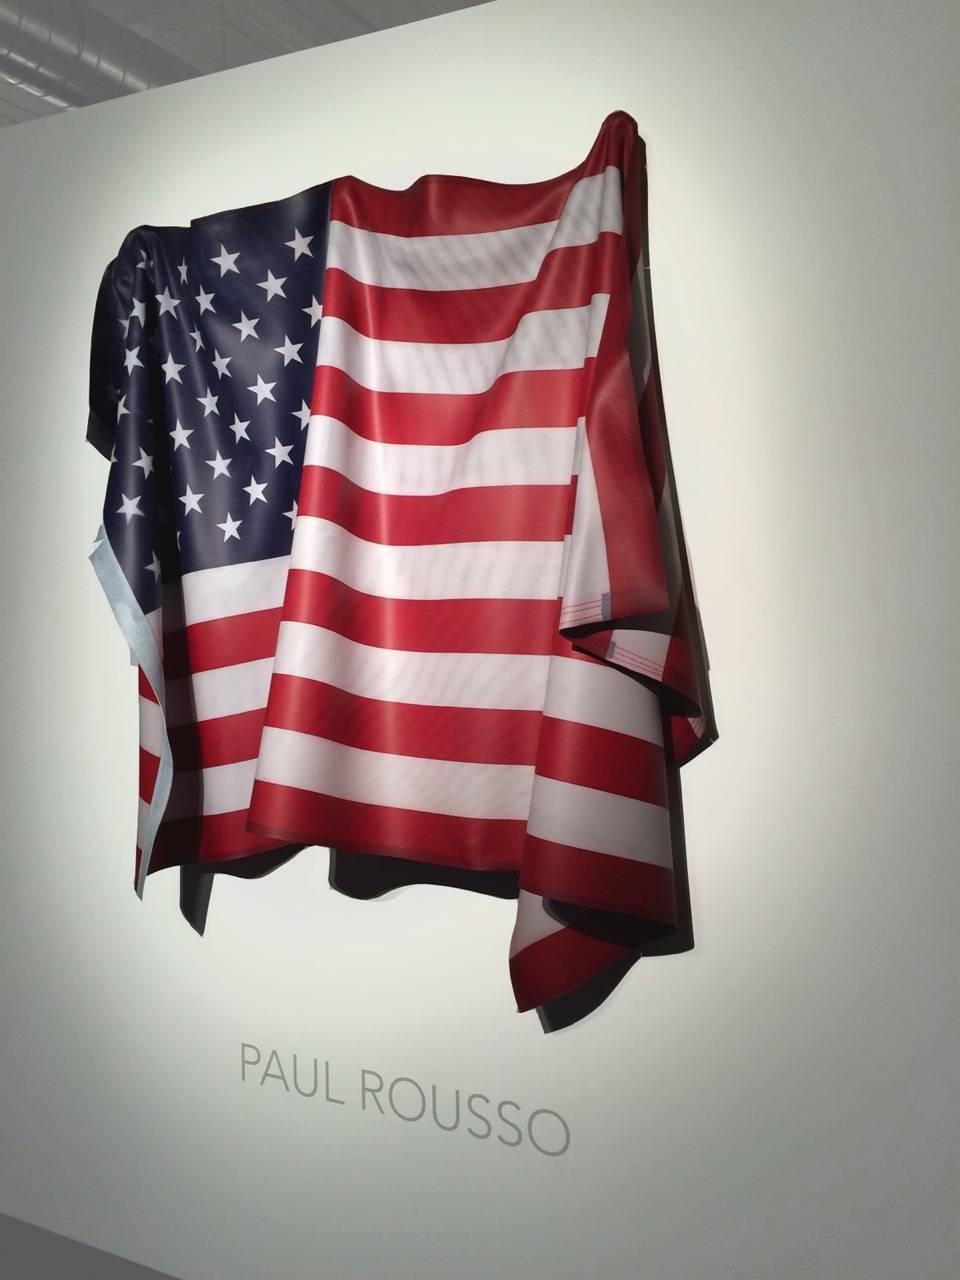 The American flag, a powerful symbol of patriotism, pride, war, freedom of speech and so much more has long attracted many of history's greatest artists - their depictions a reflection of the times in which they lived.  In Paul Rousso's